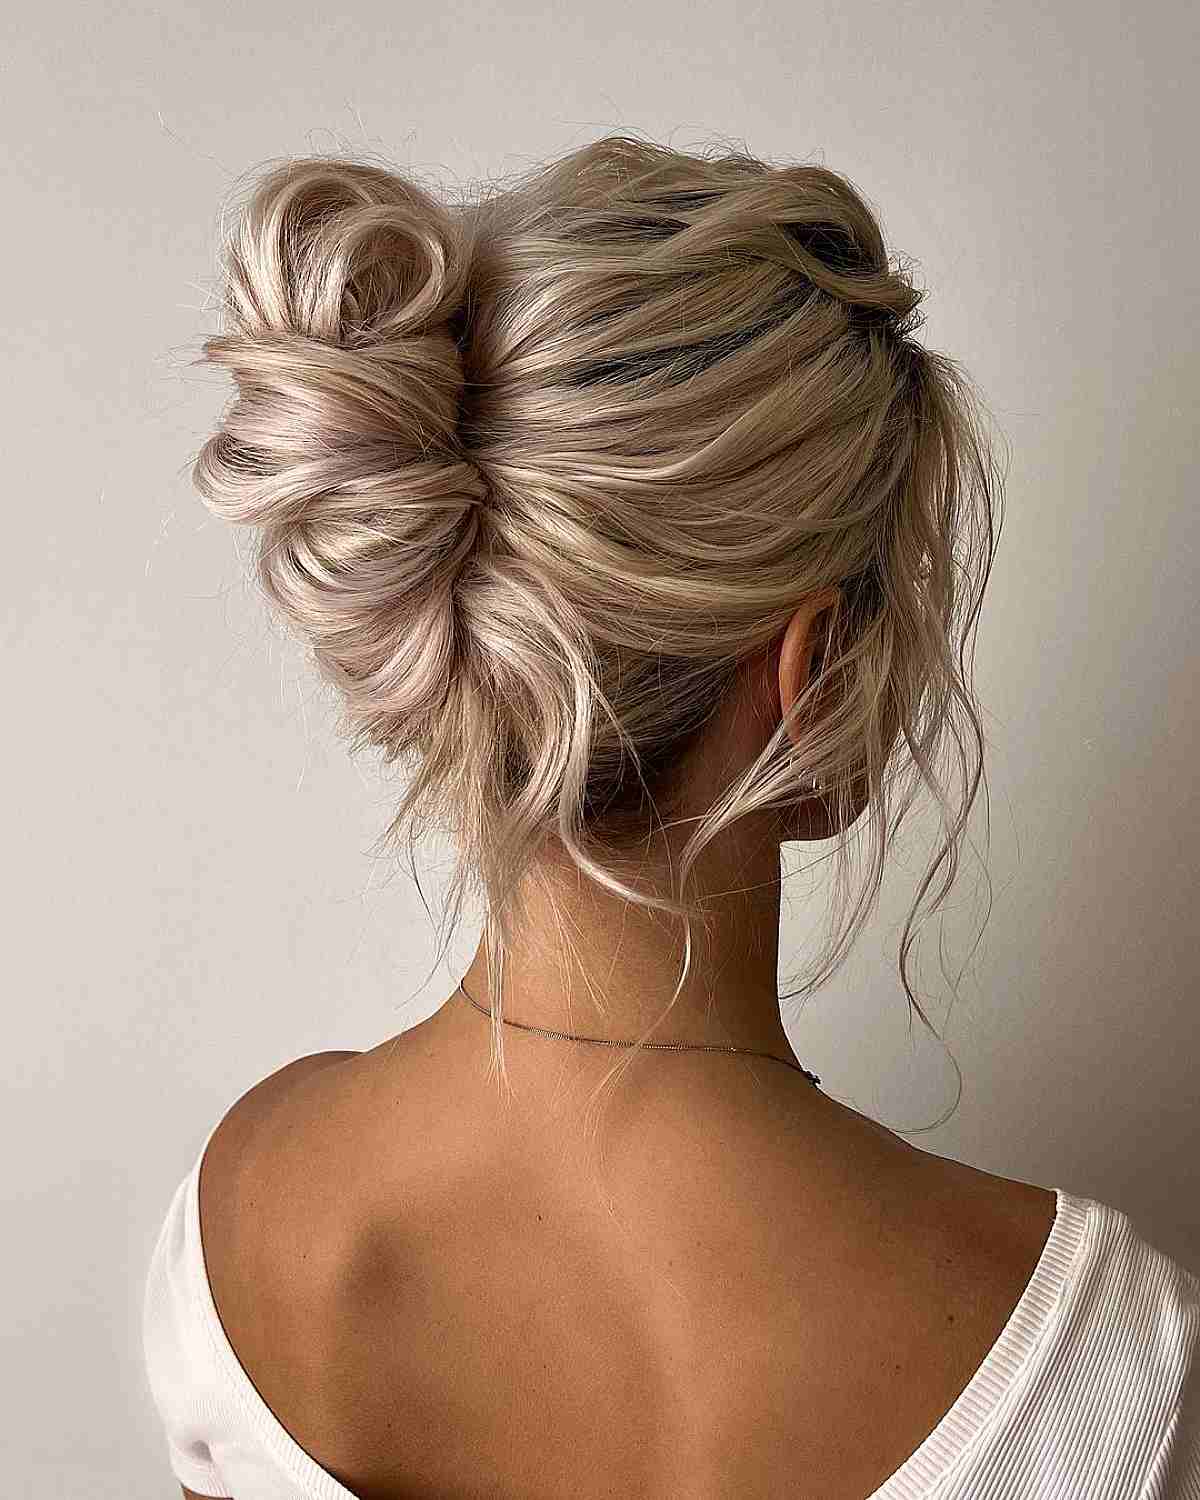 15 Simple and Easy Hairstyles With Useful Tutorials - Pretty Designs